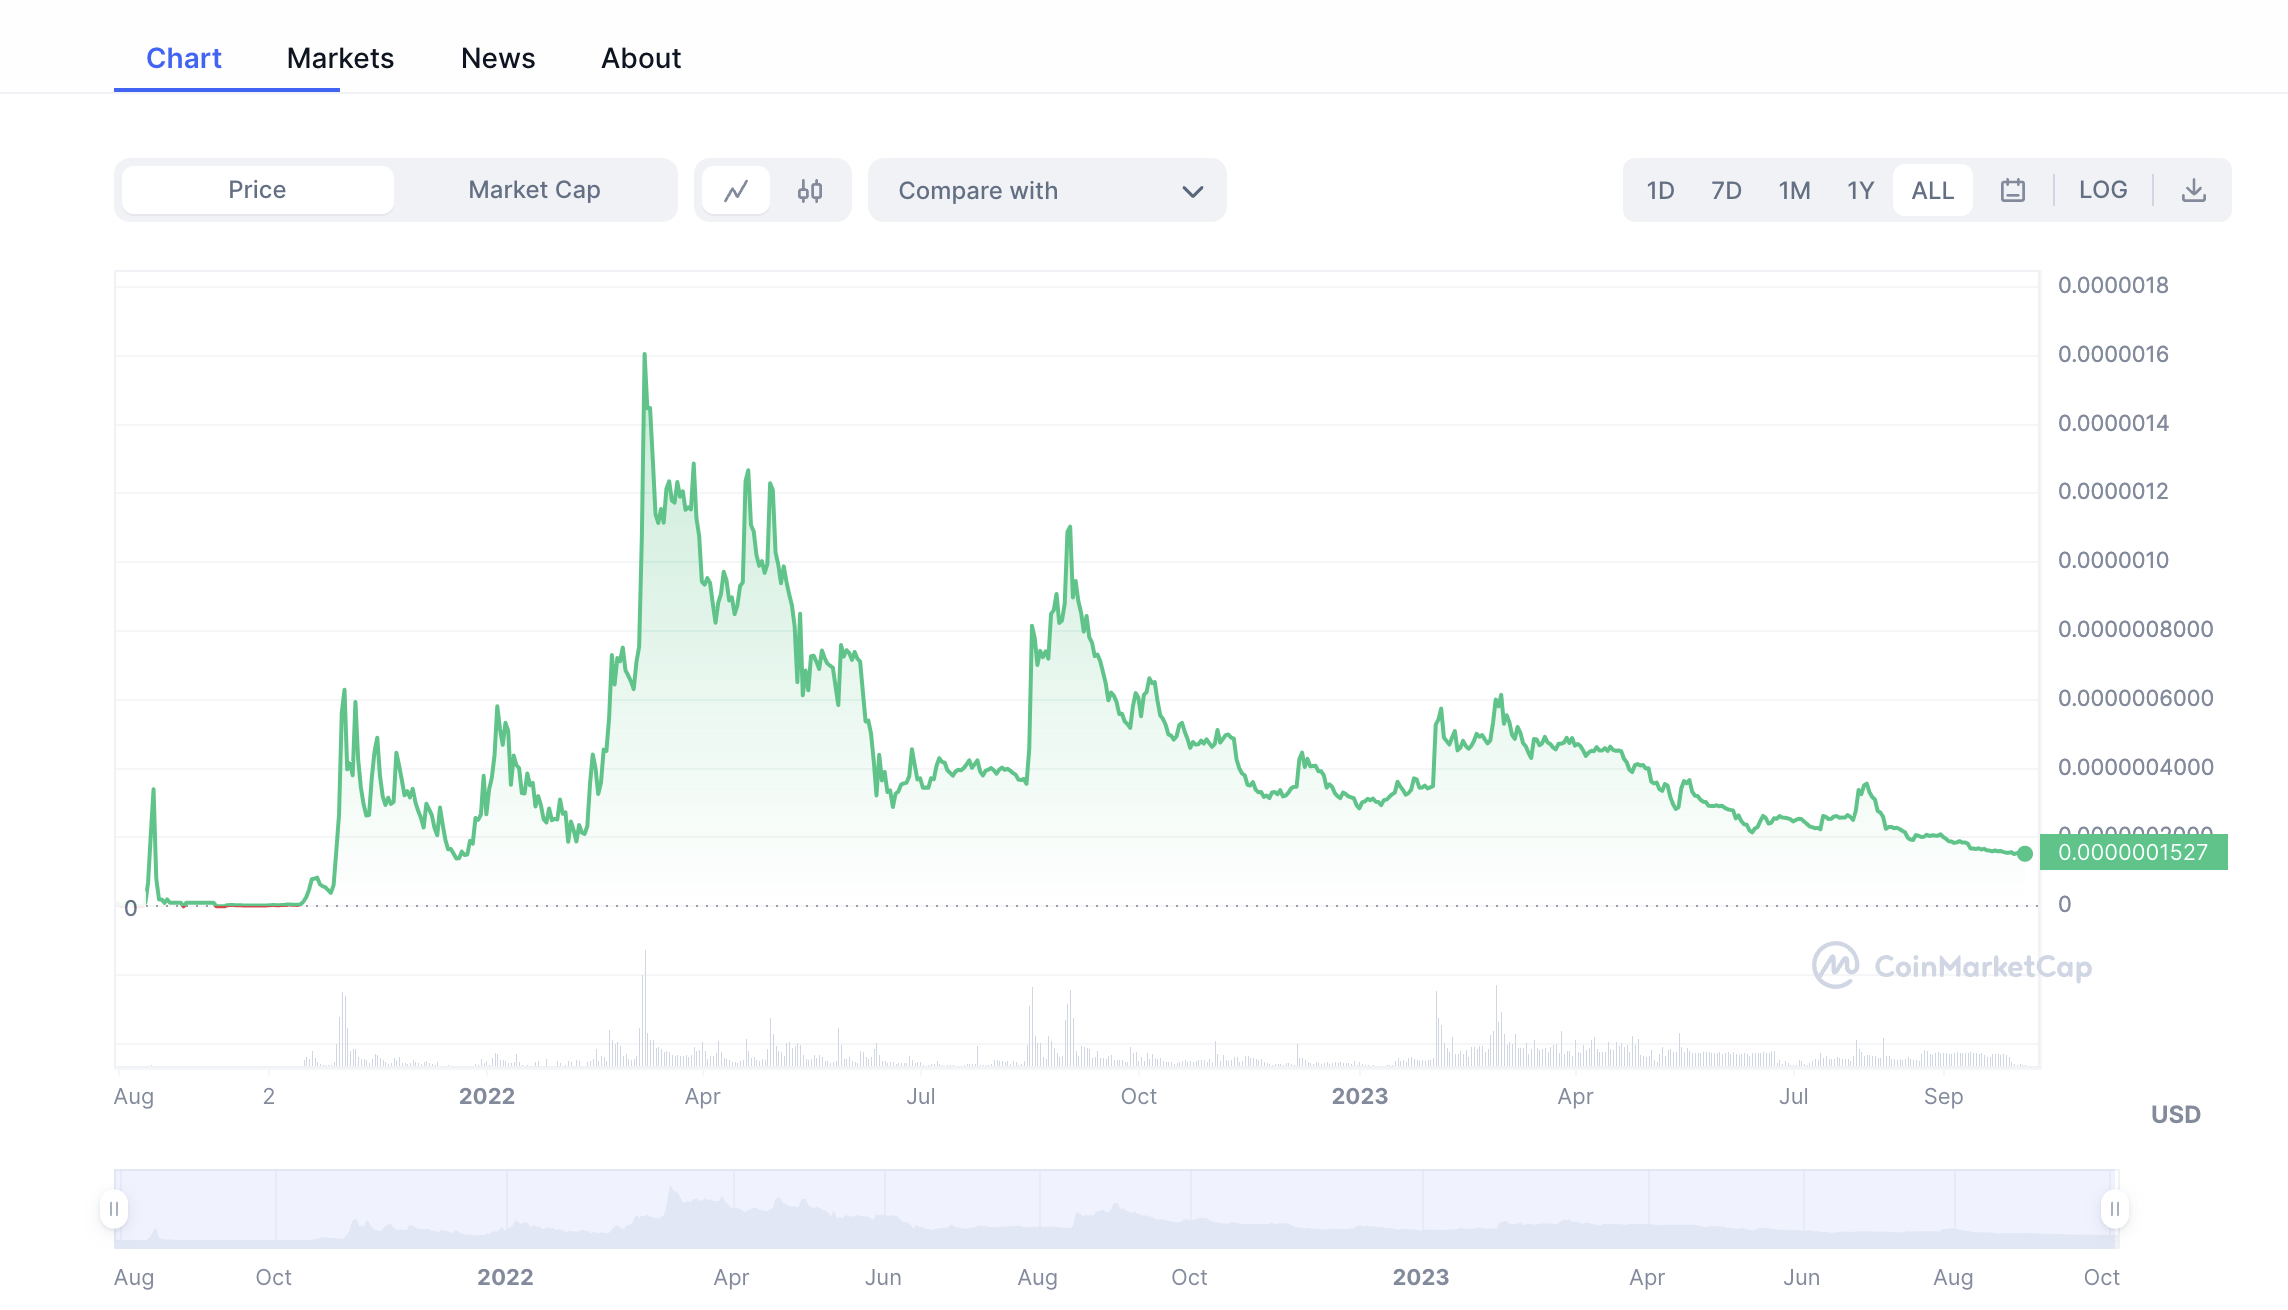 Price fluctuations of Bitgert’s cryptocurrency since the inception of the project. Source: coinmarketcap